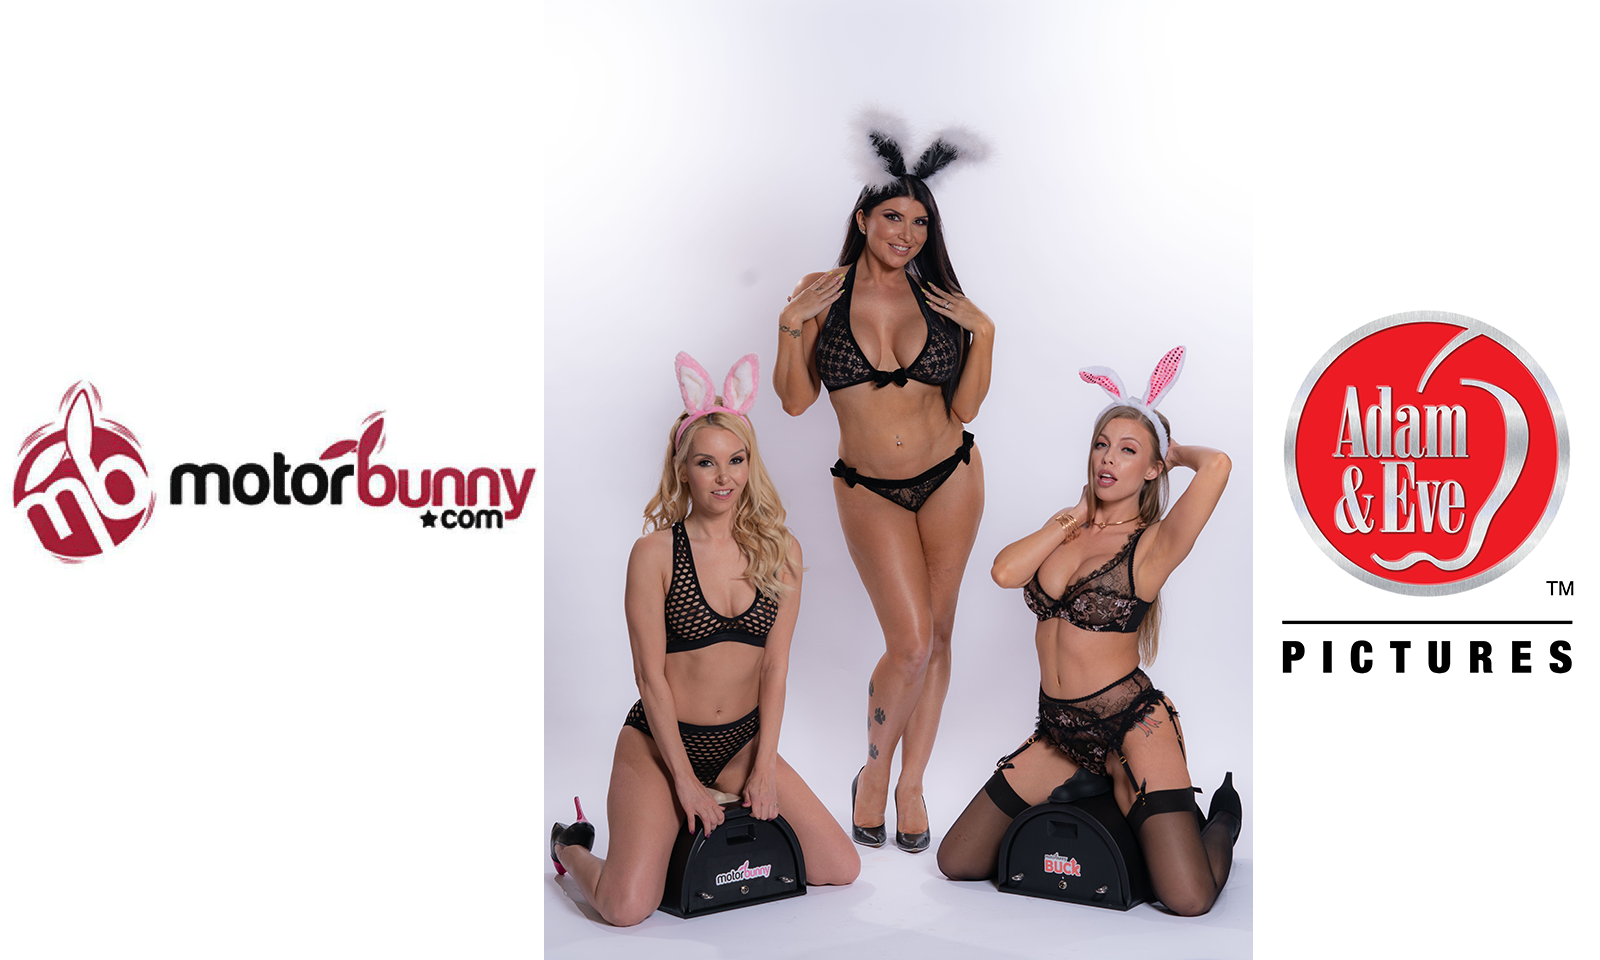 1st Episode of Kay Brandt's 'Motorbunny Club’ Now Showing on VOD